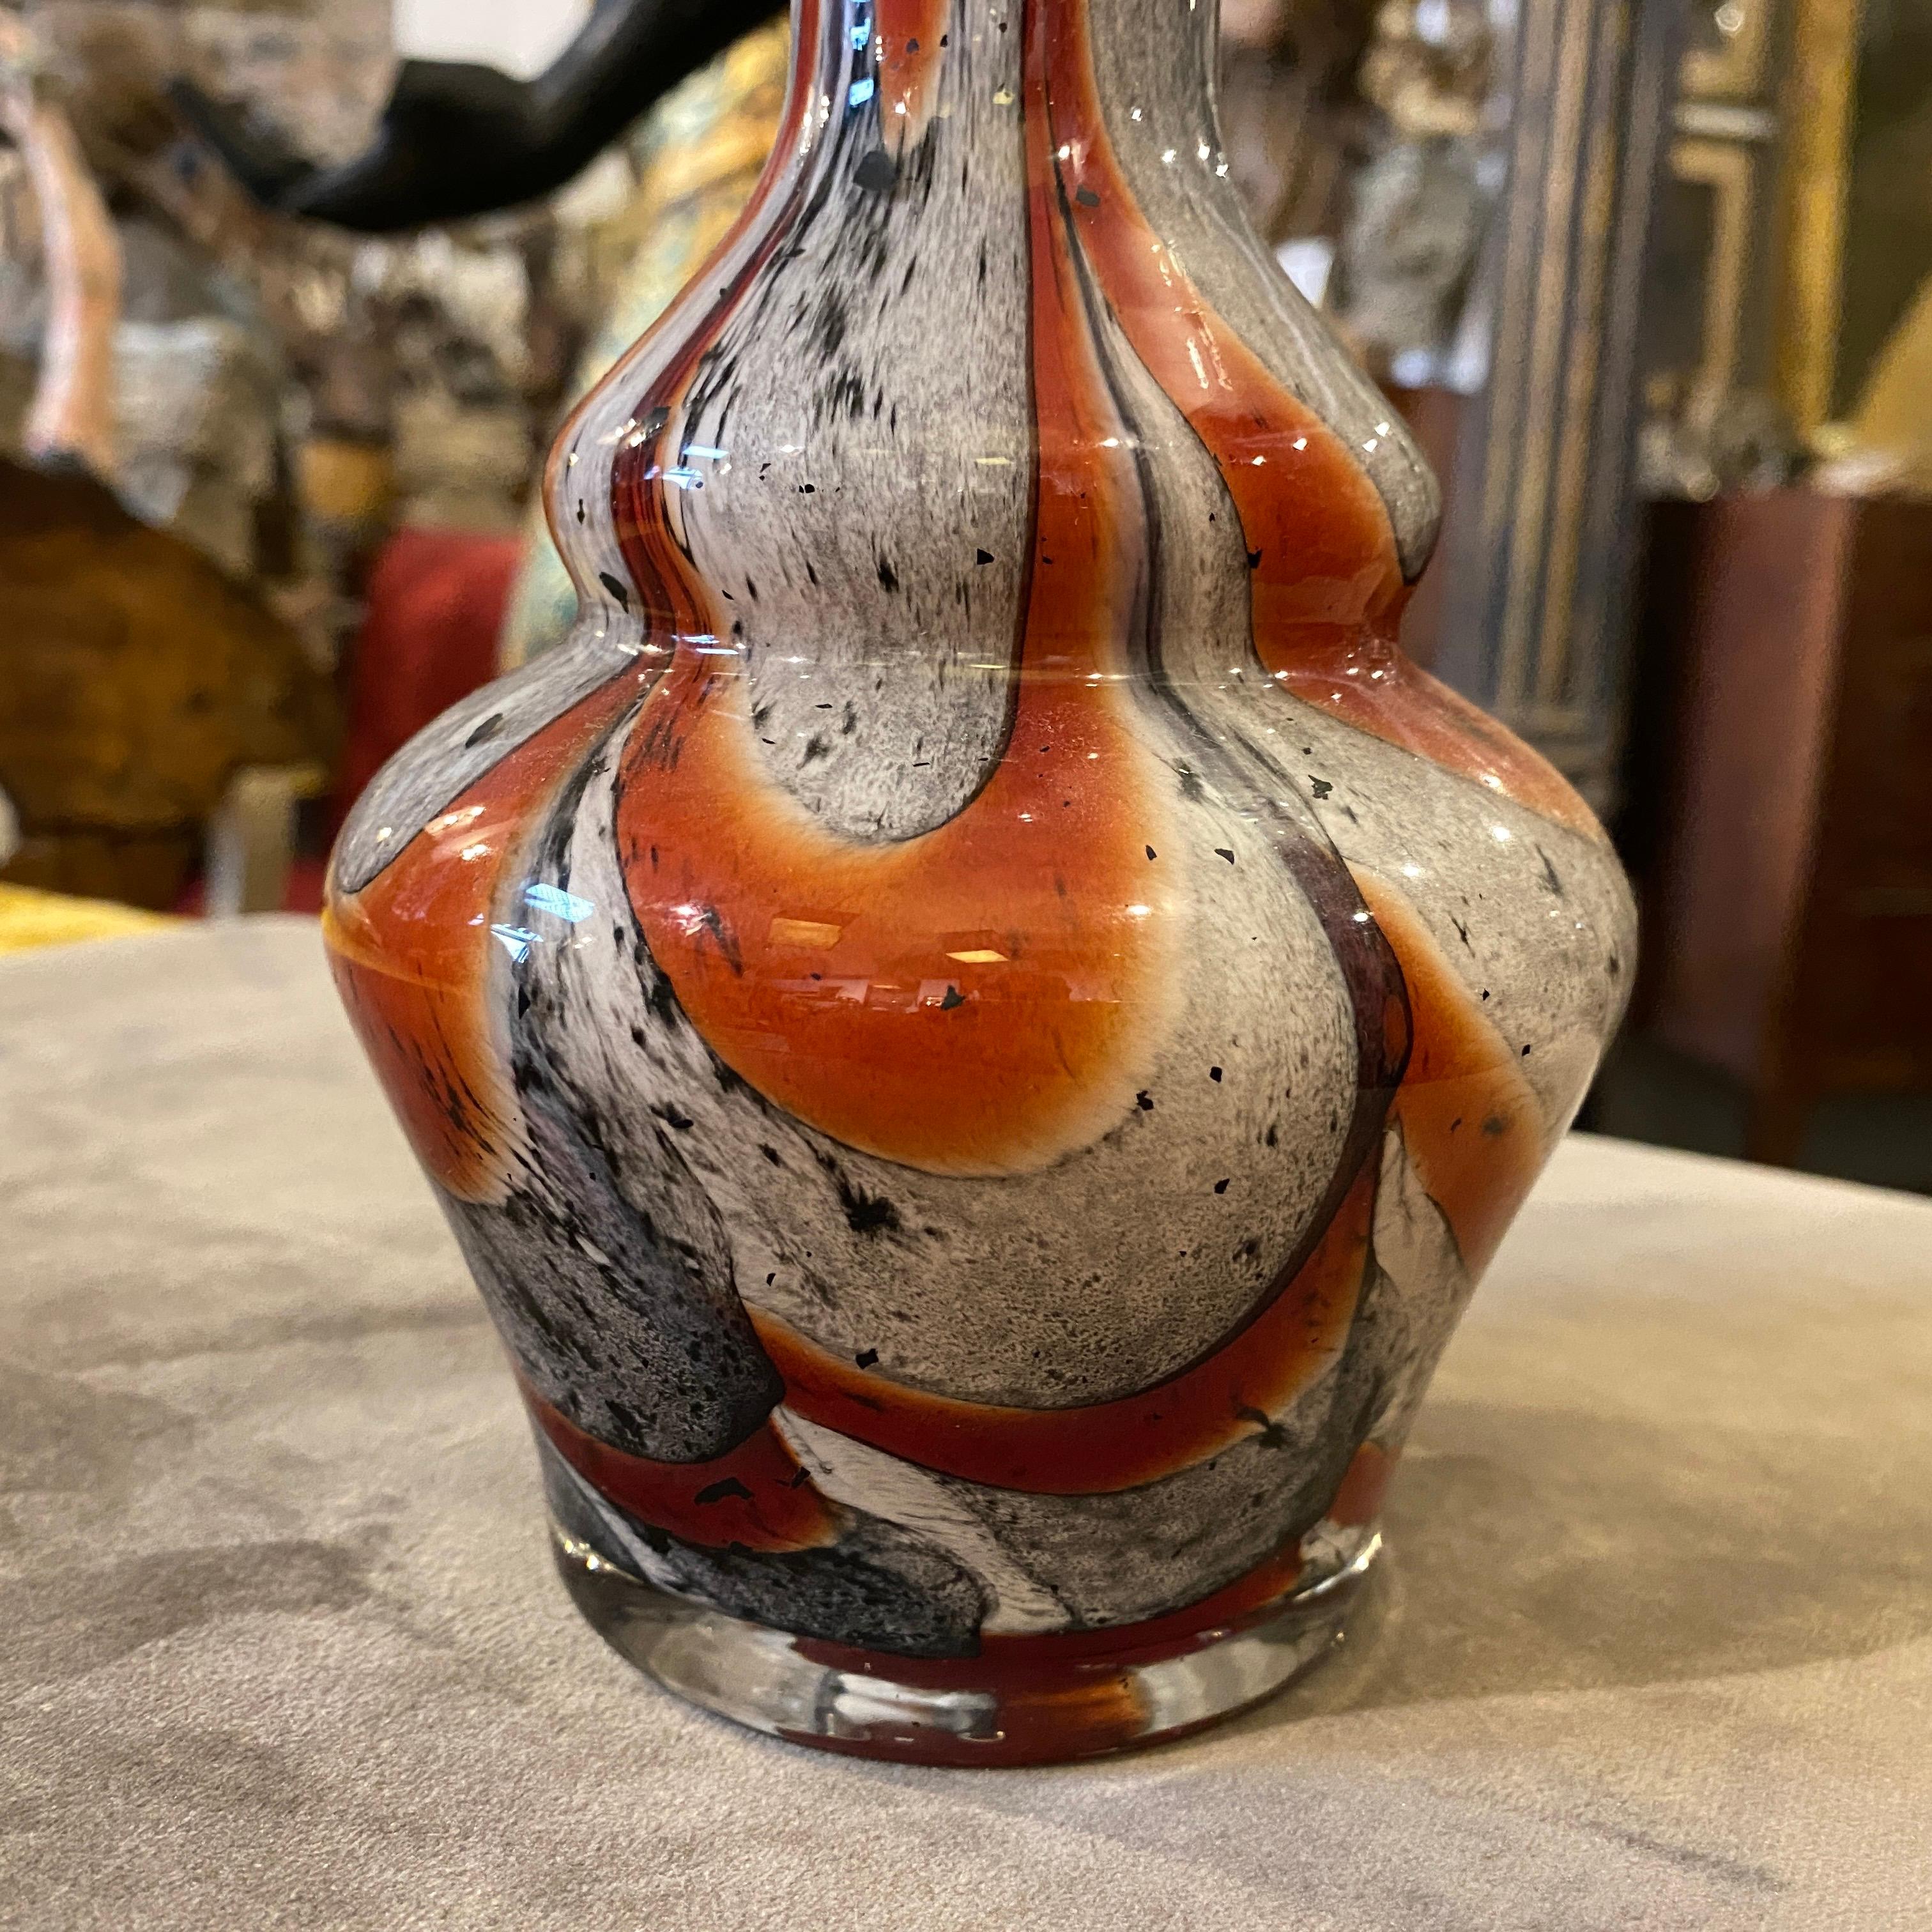 A stylish vase designed by Carlo Moretti and manufactured by Opaline Florence in the Seventies, the red, orange and gray decors on a white opaline glass are in perfect conditions. This  Vase is a beautiful and unique piece of vintage glassware.